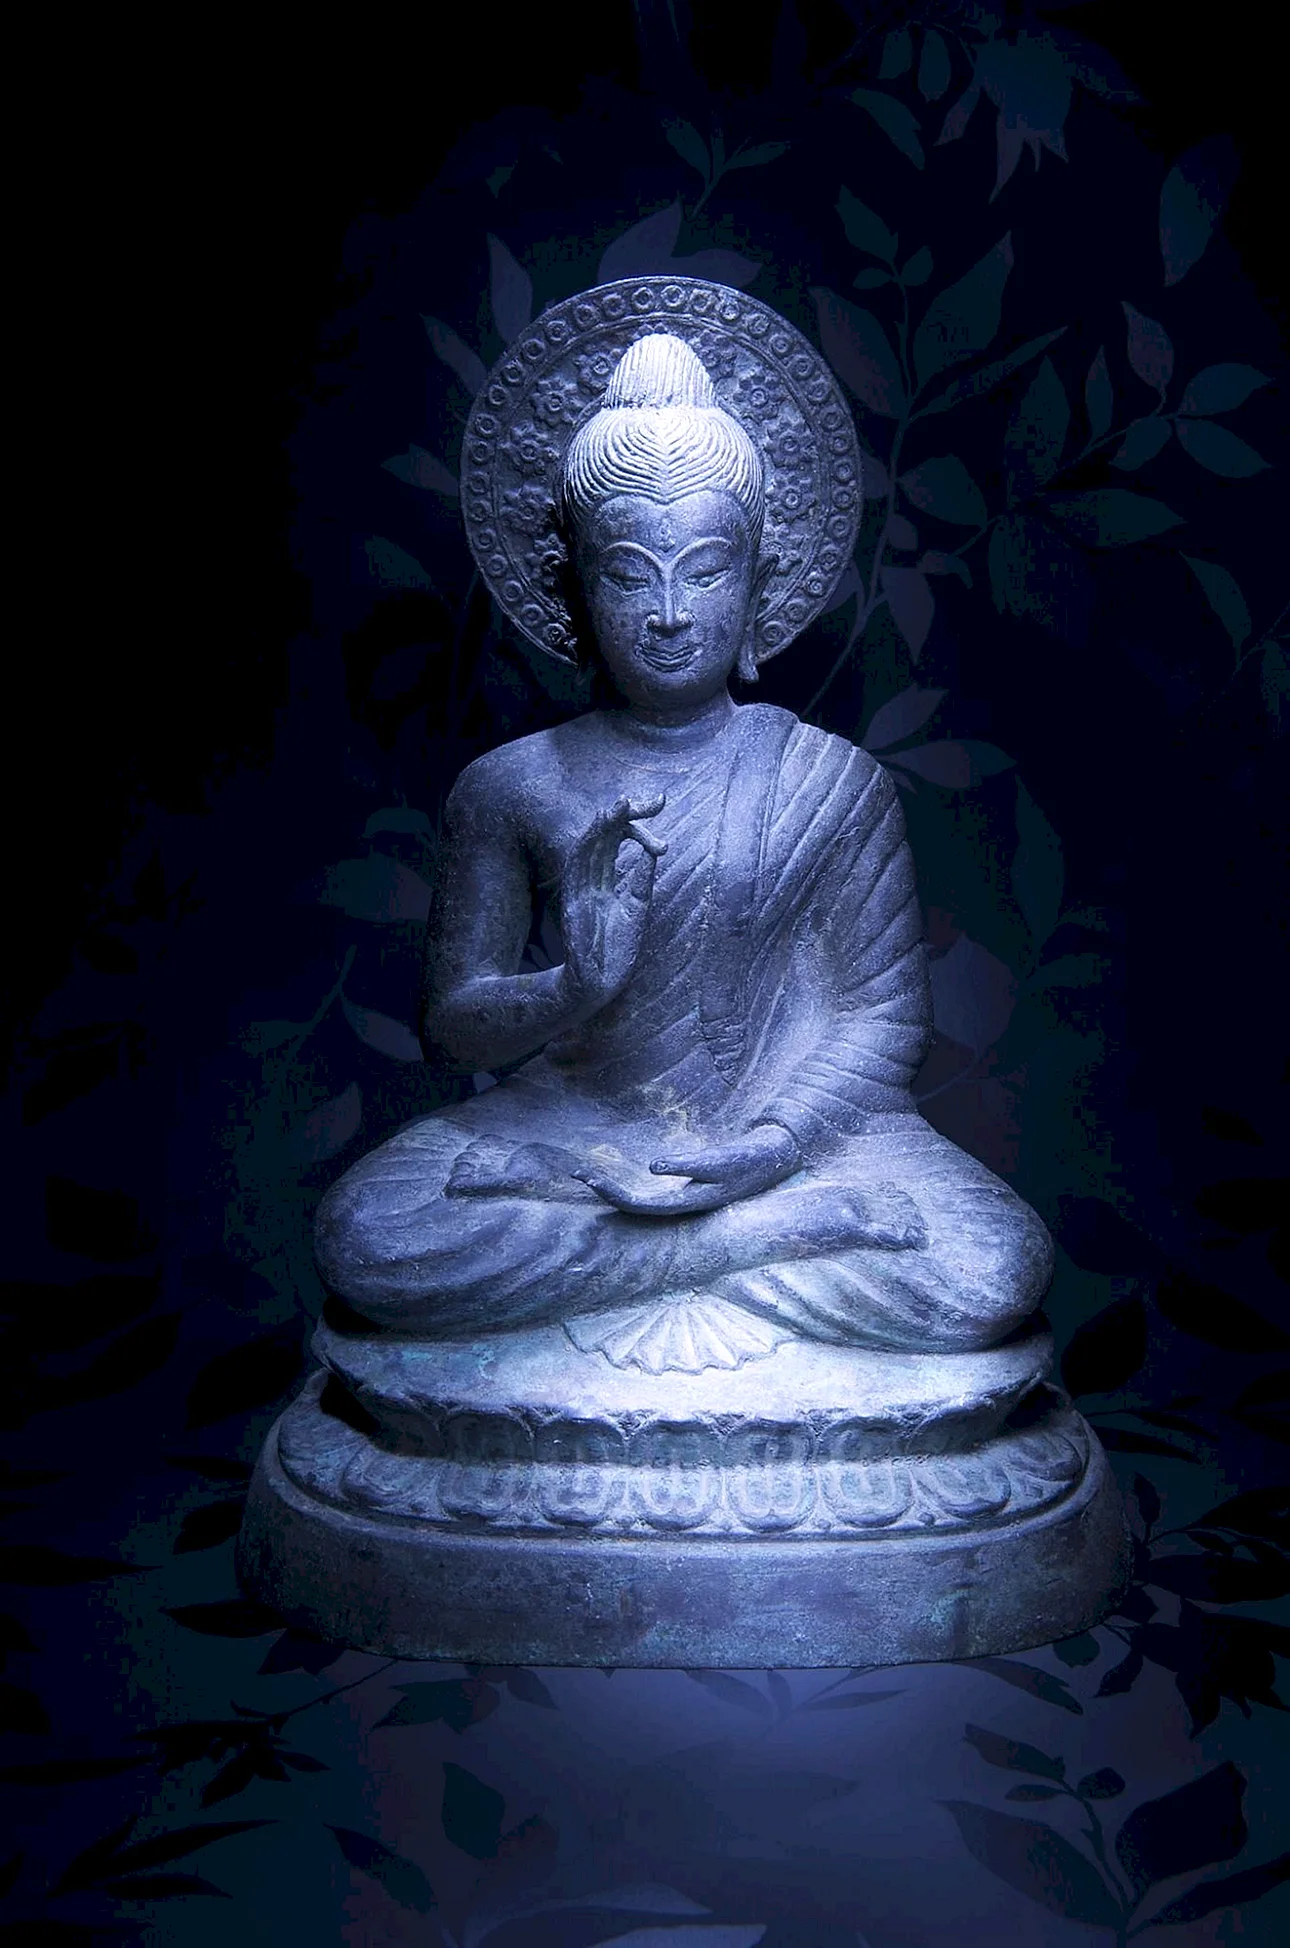 Buddha Wallpaper For iPhone